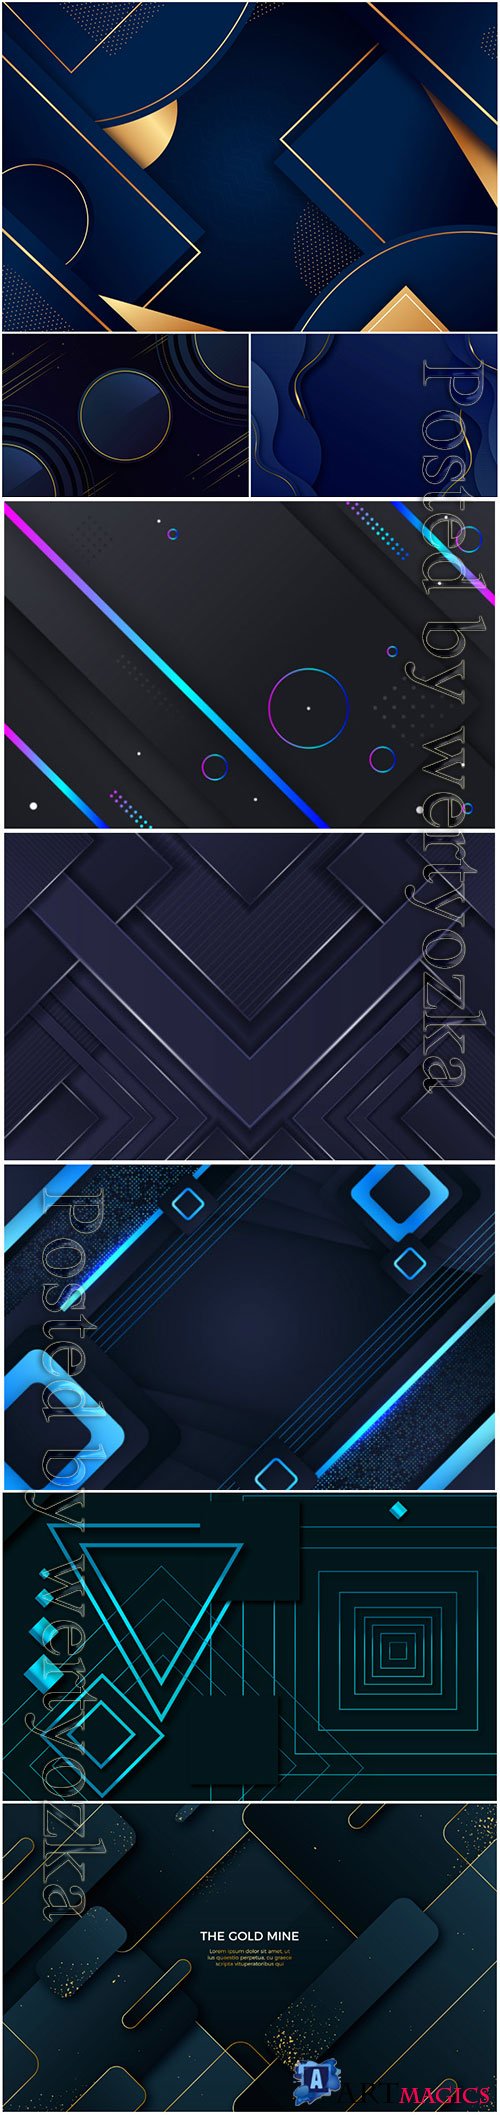 Luxury abstract backgrounds in vector # 4